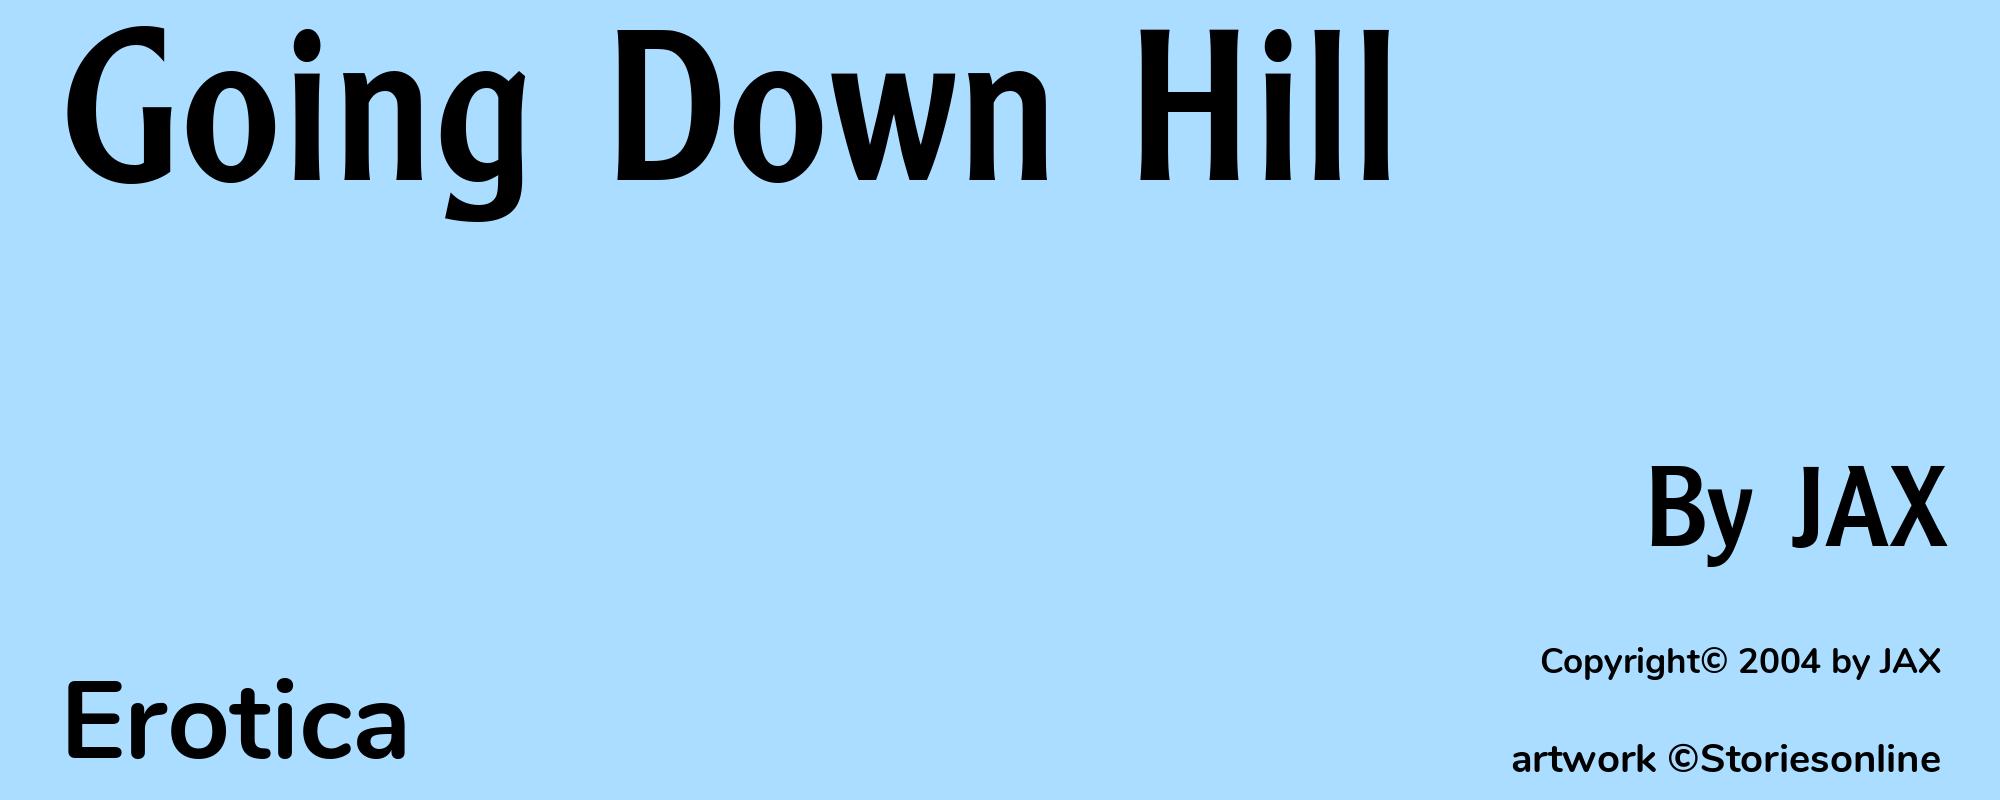 Going Down Hill - Cover